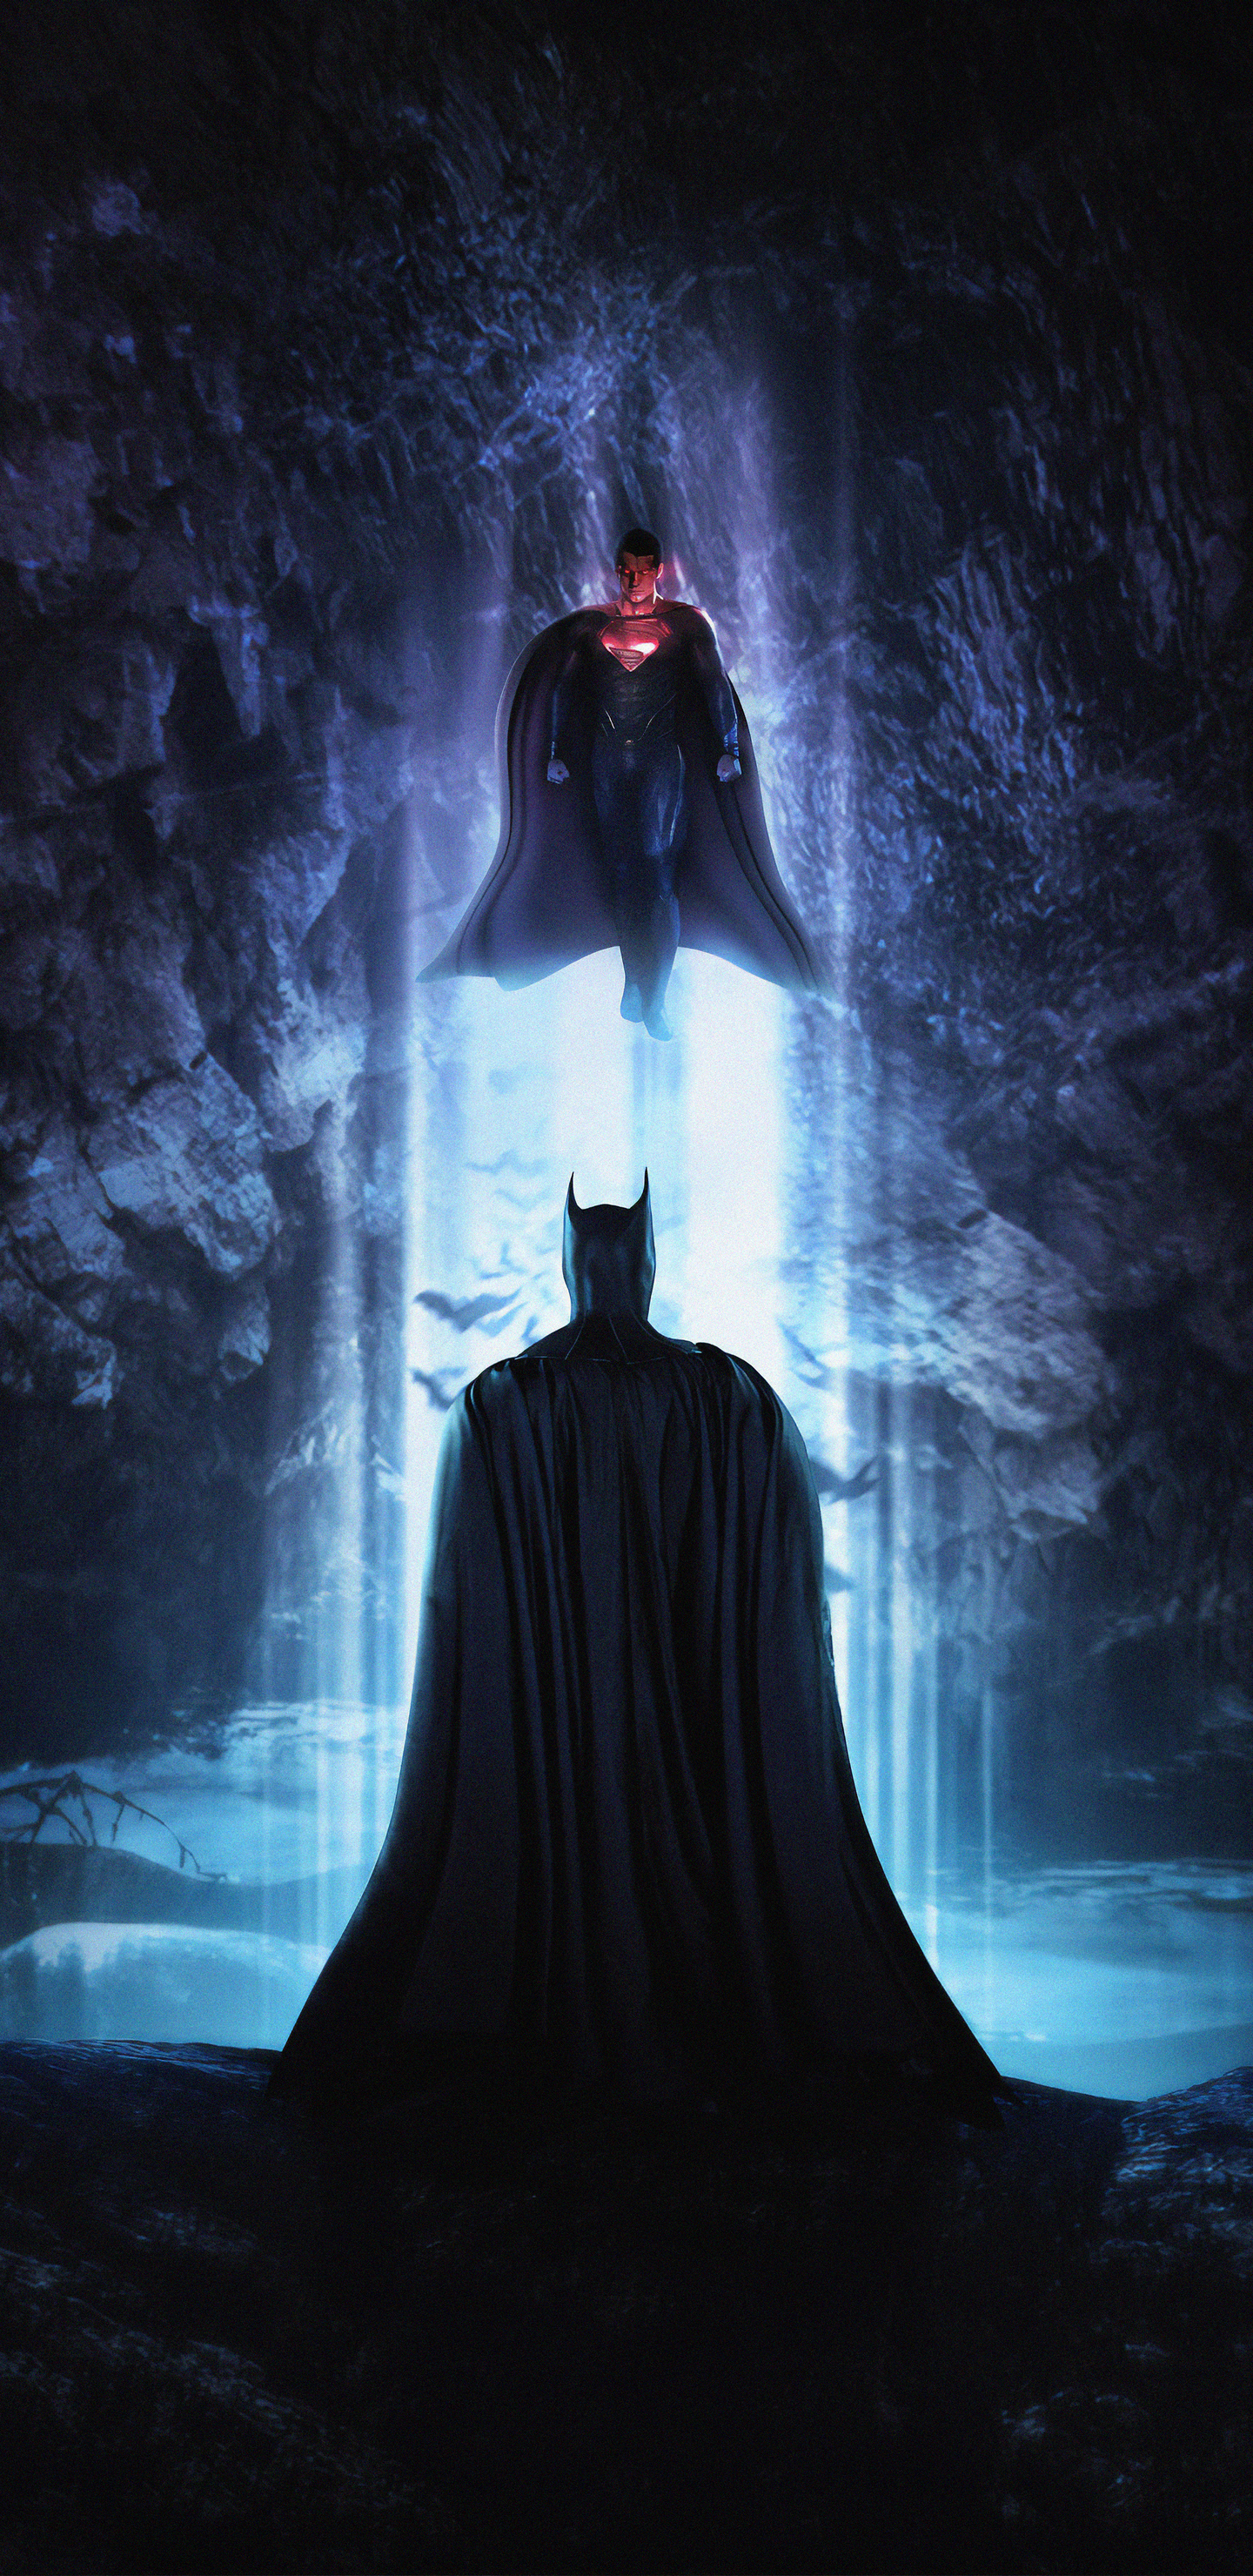 1440x2960 Batman And Superman 4k Art Samsung Galaxy Note 9,8, S9,S8,S8+ QHD  HD 4k Wallpapers, Images, Backgrounds, Photos and Pictures